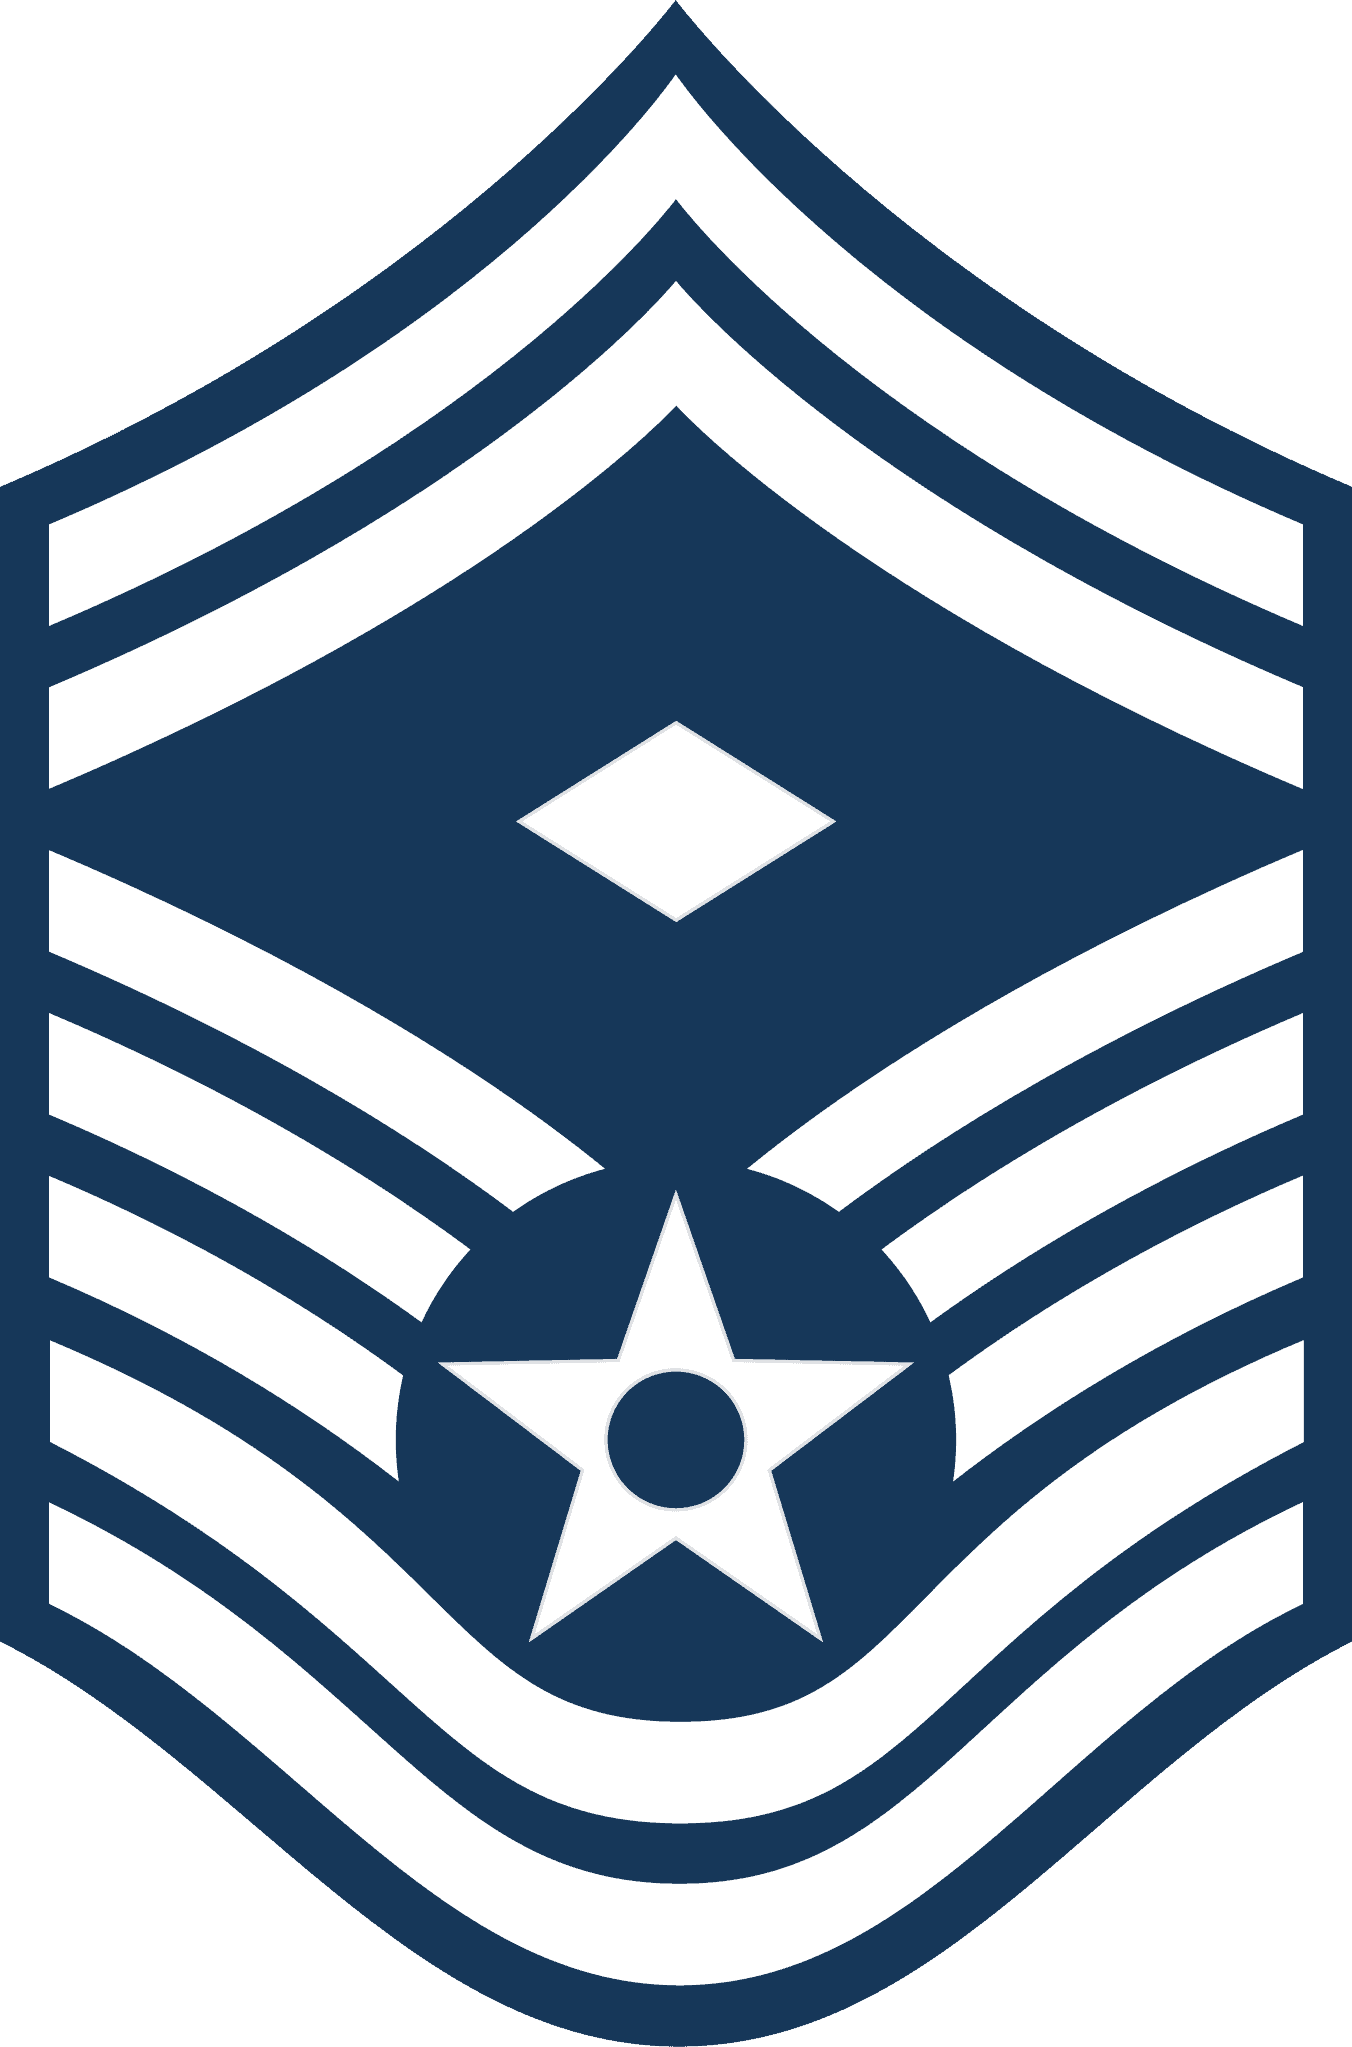 <p>As a Senior Master Sergeant, you’ll mentor junior officers while potentially serving a more senior officer in a staff role. Earnings at the E-8 rank earn between $62,579 and $89,249 per year. </p><p><span>Would you please let us know what you think about our content? <p>Agree? Tell us by clicking the “Thumbs Up” button above.</p> Disagree? Leave a comment telling us what you’d change.</span></p>